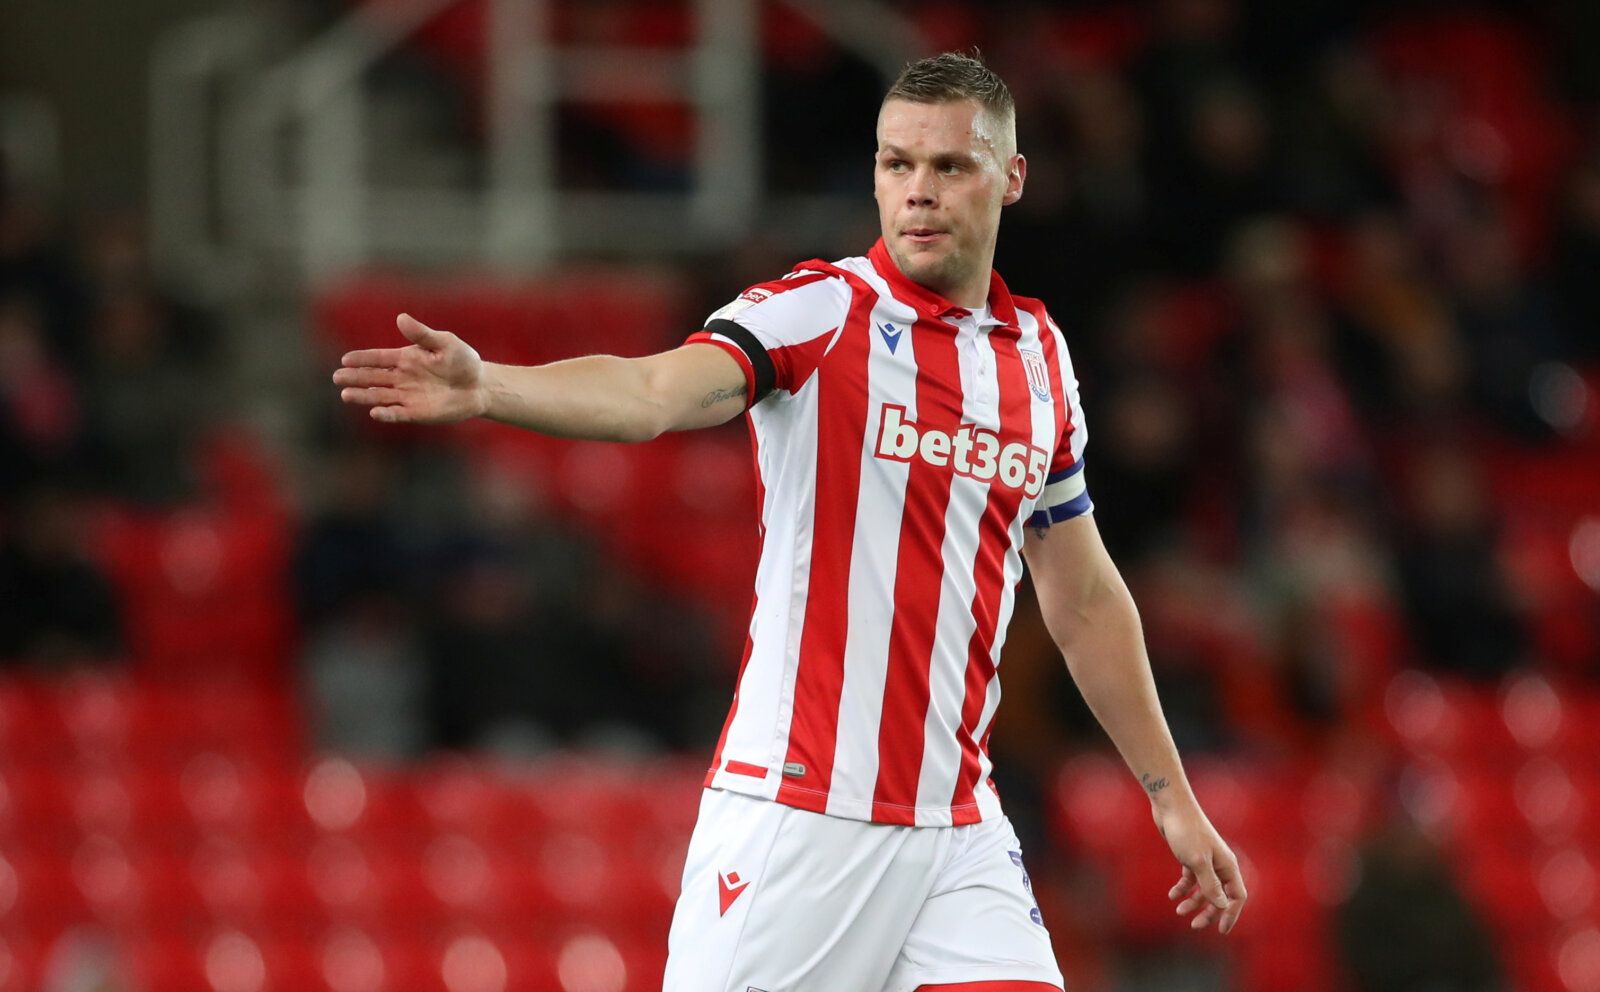 Soccer Football - Championship - Stoke City v Luton Town - bet365 Stadium, Stoke-On-Trent, Britain - December 10, 2019   Stoke City's Ryan Shawcross    Action Images/Carl Recine    EDITORIAL USE ONLY. No use with unauthorized audio, video, data, fixture lists, club/league logos or 